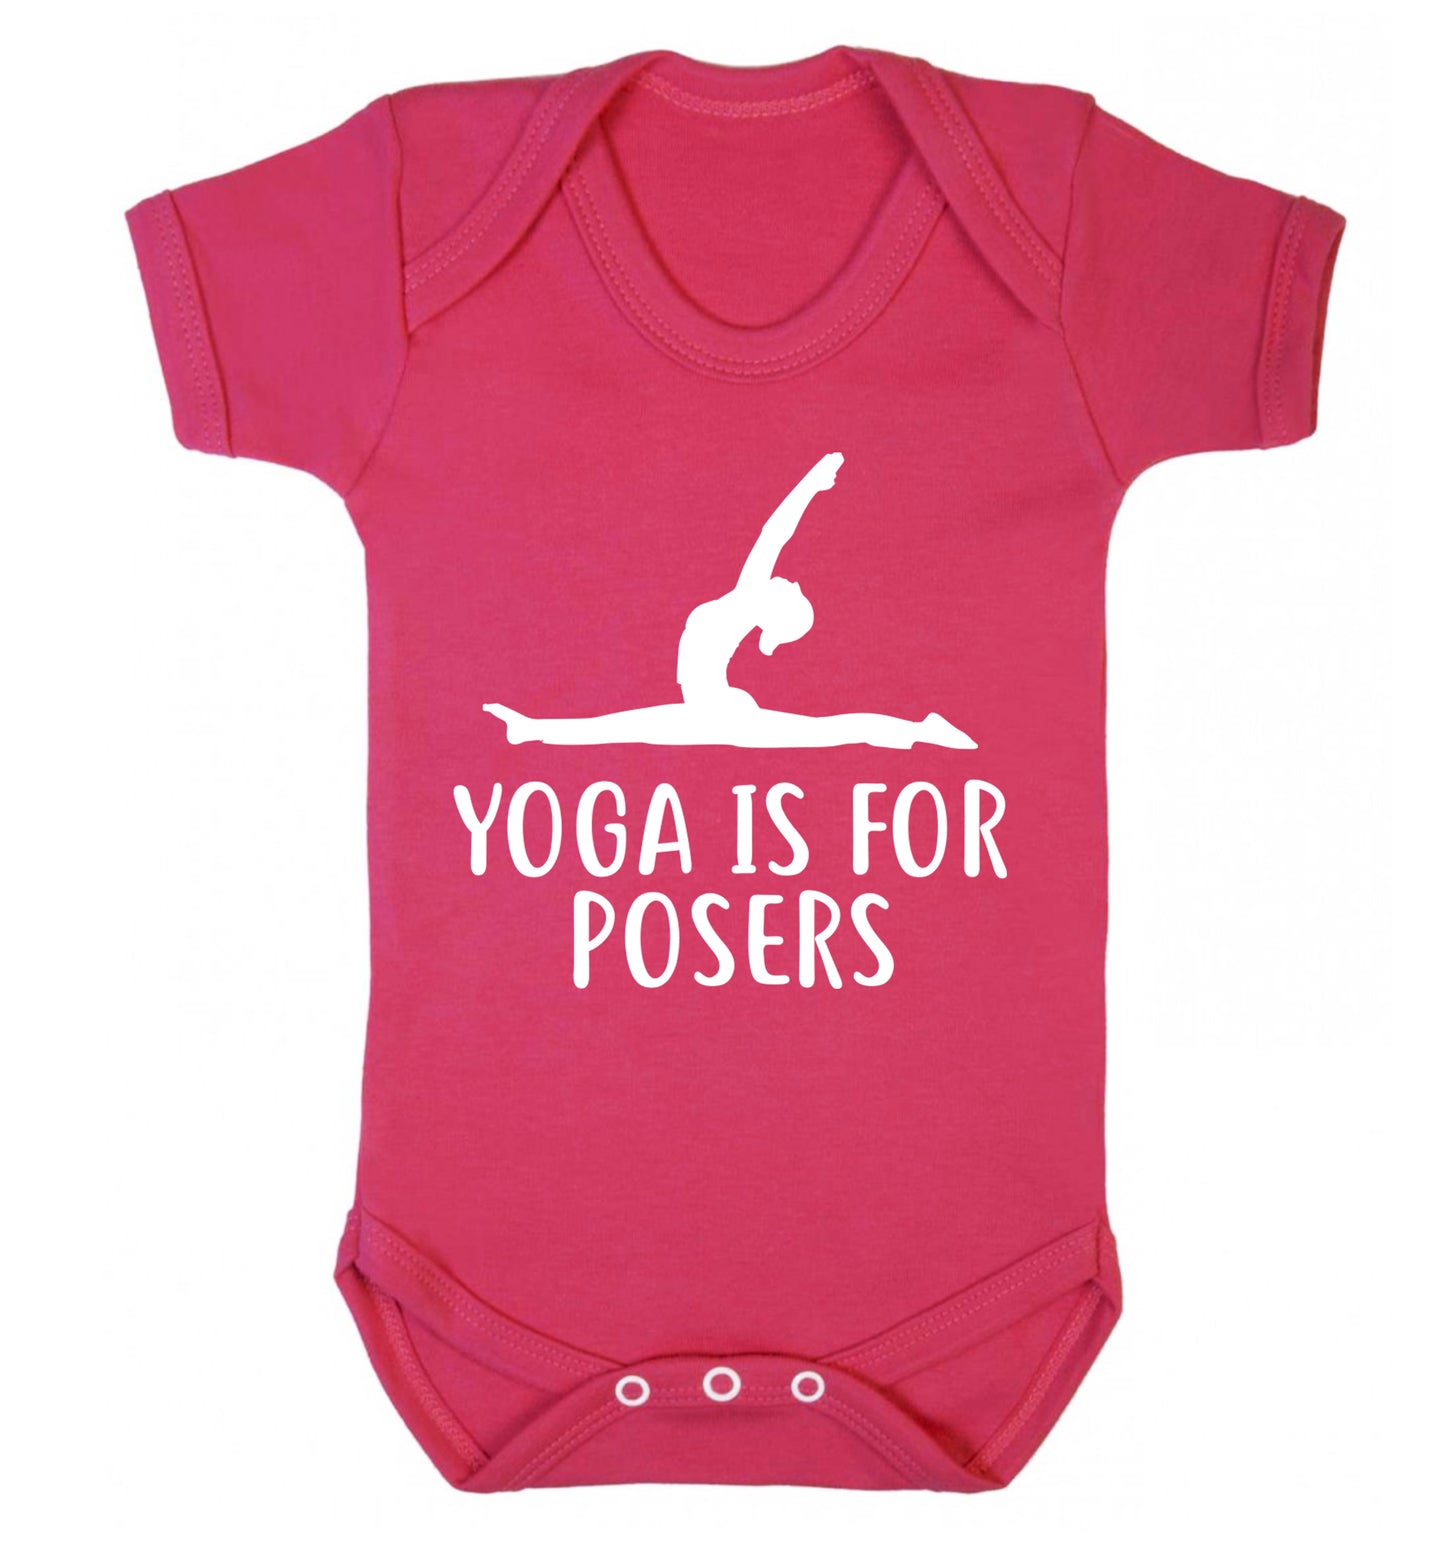 Yoga is for posers Baby Vest dark pink 18-24 months